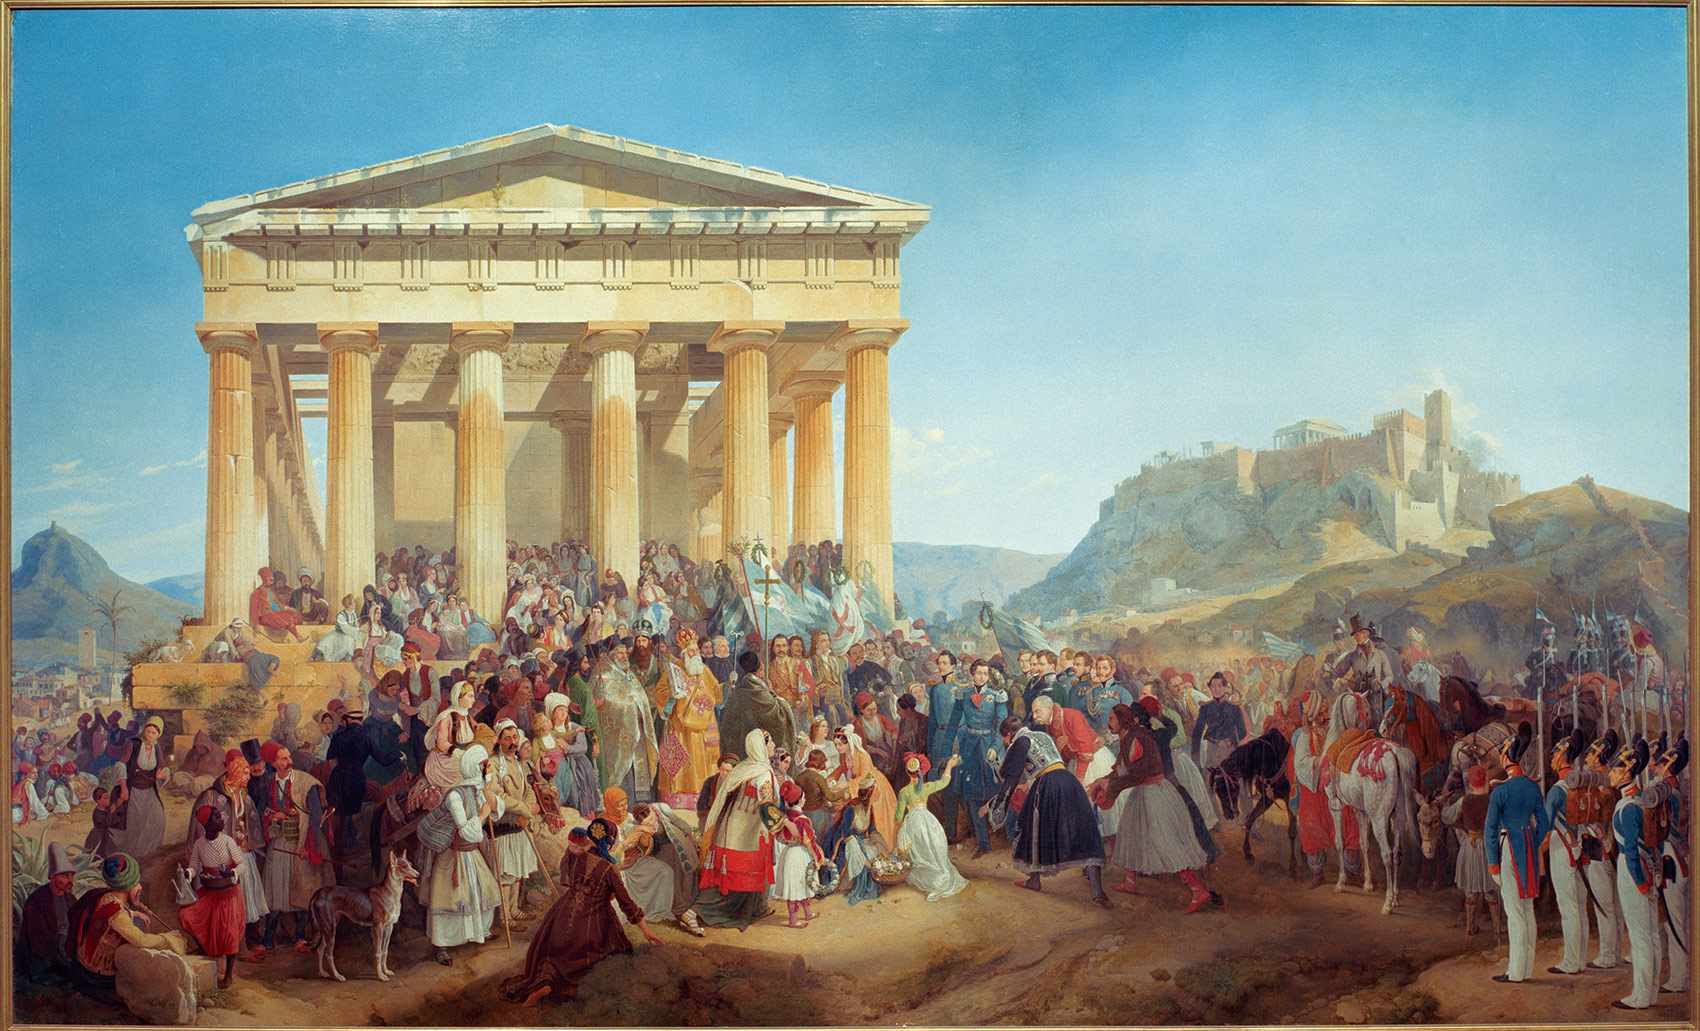 Reception of King Otto of Greece in Athens, 23 May 1833, by Peter von Hess, 1839